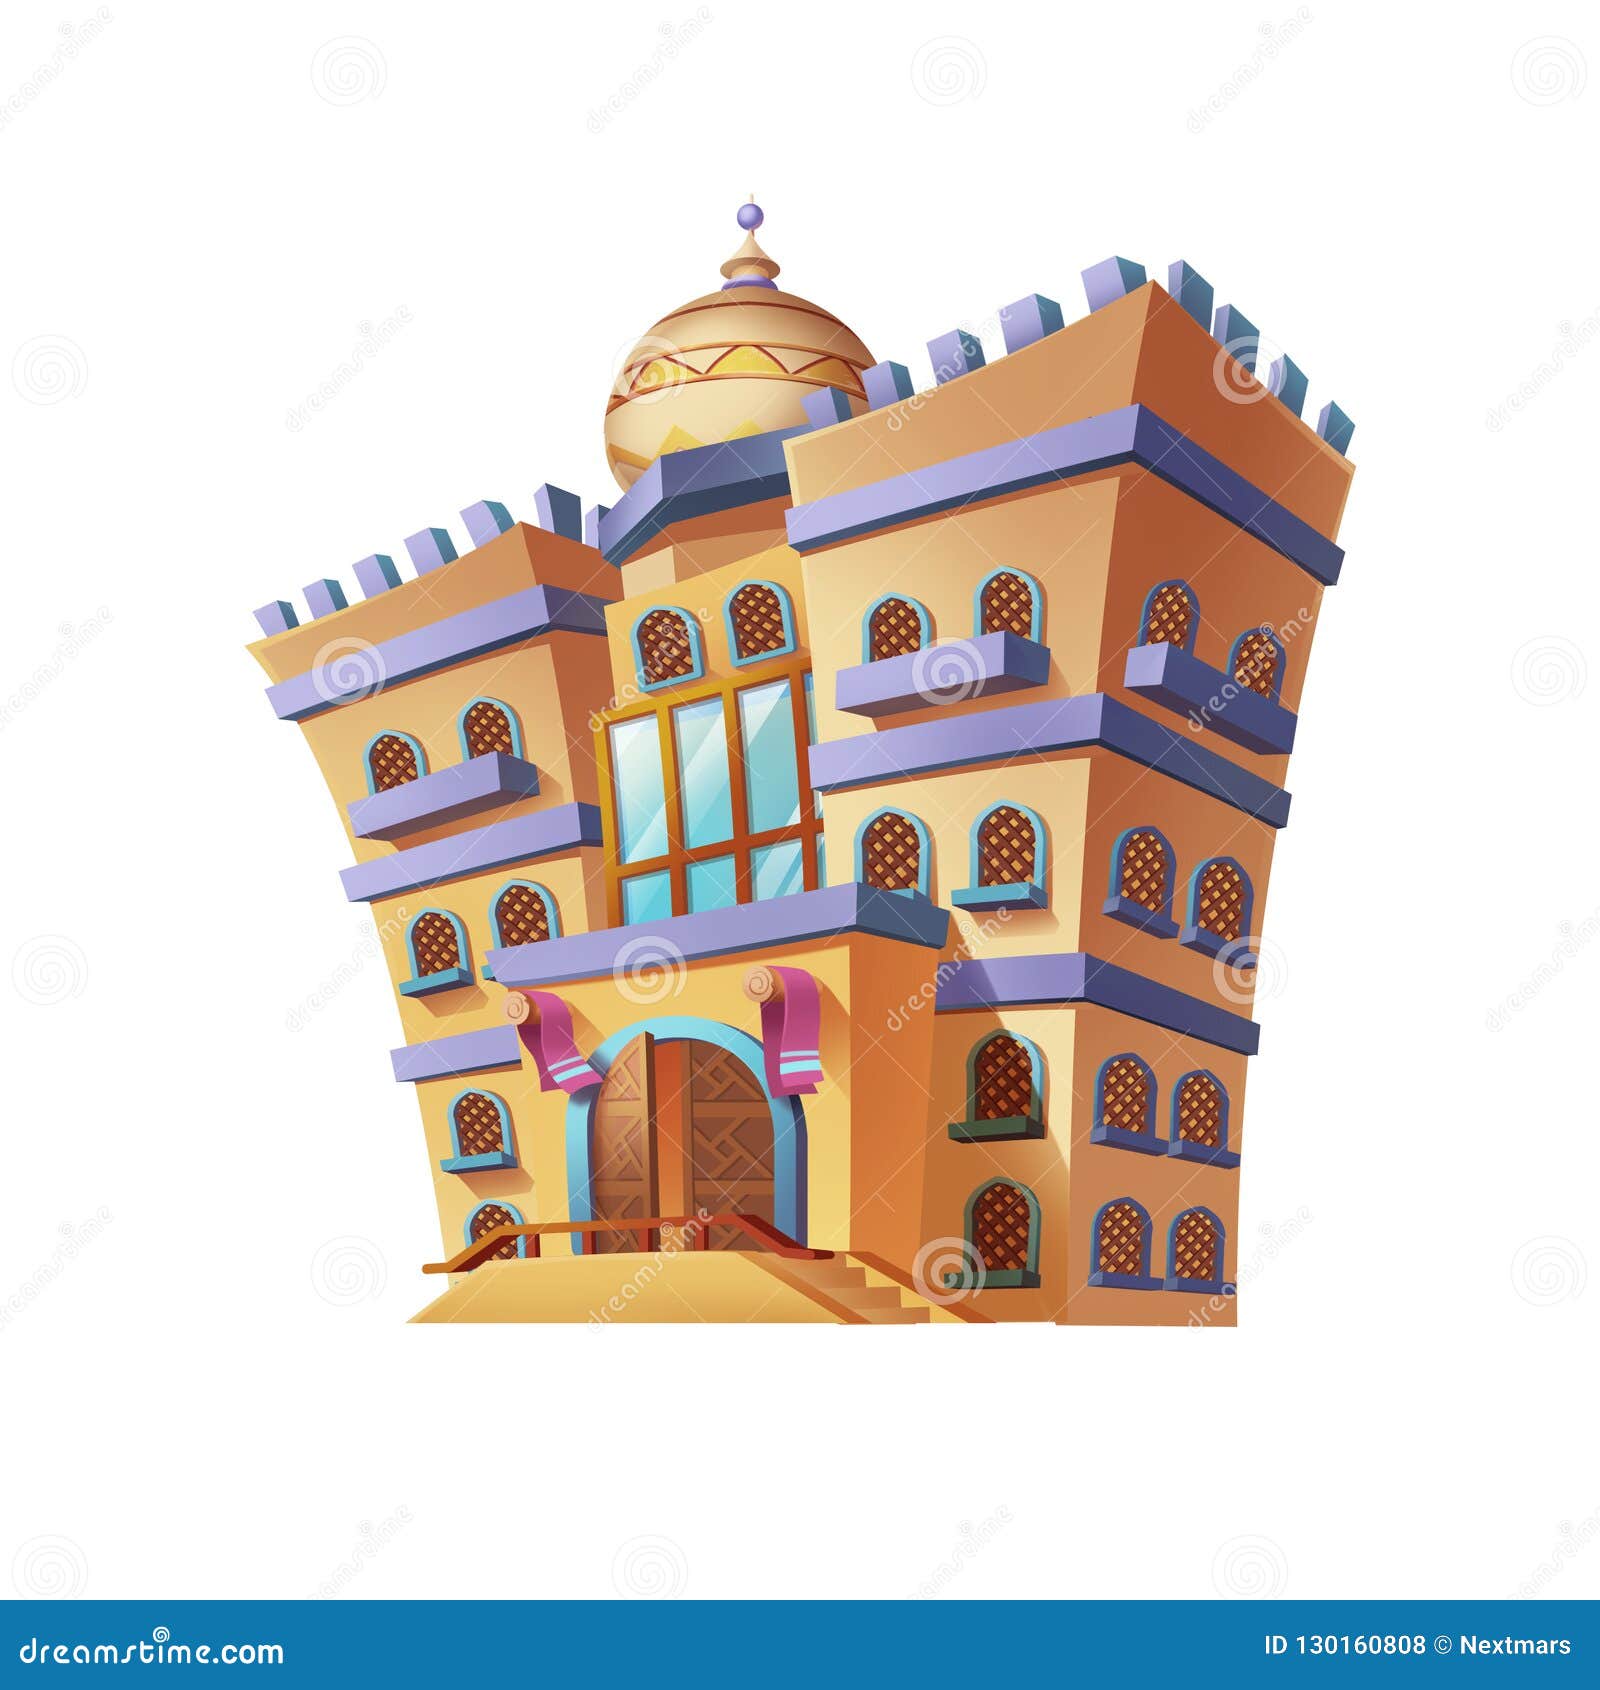 desert emirates palaces arabian architecture. game assets card object buildings